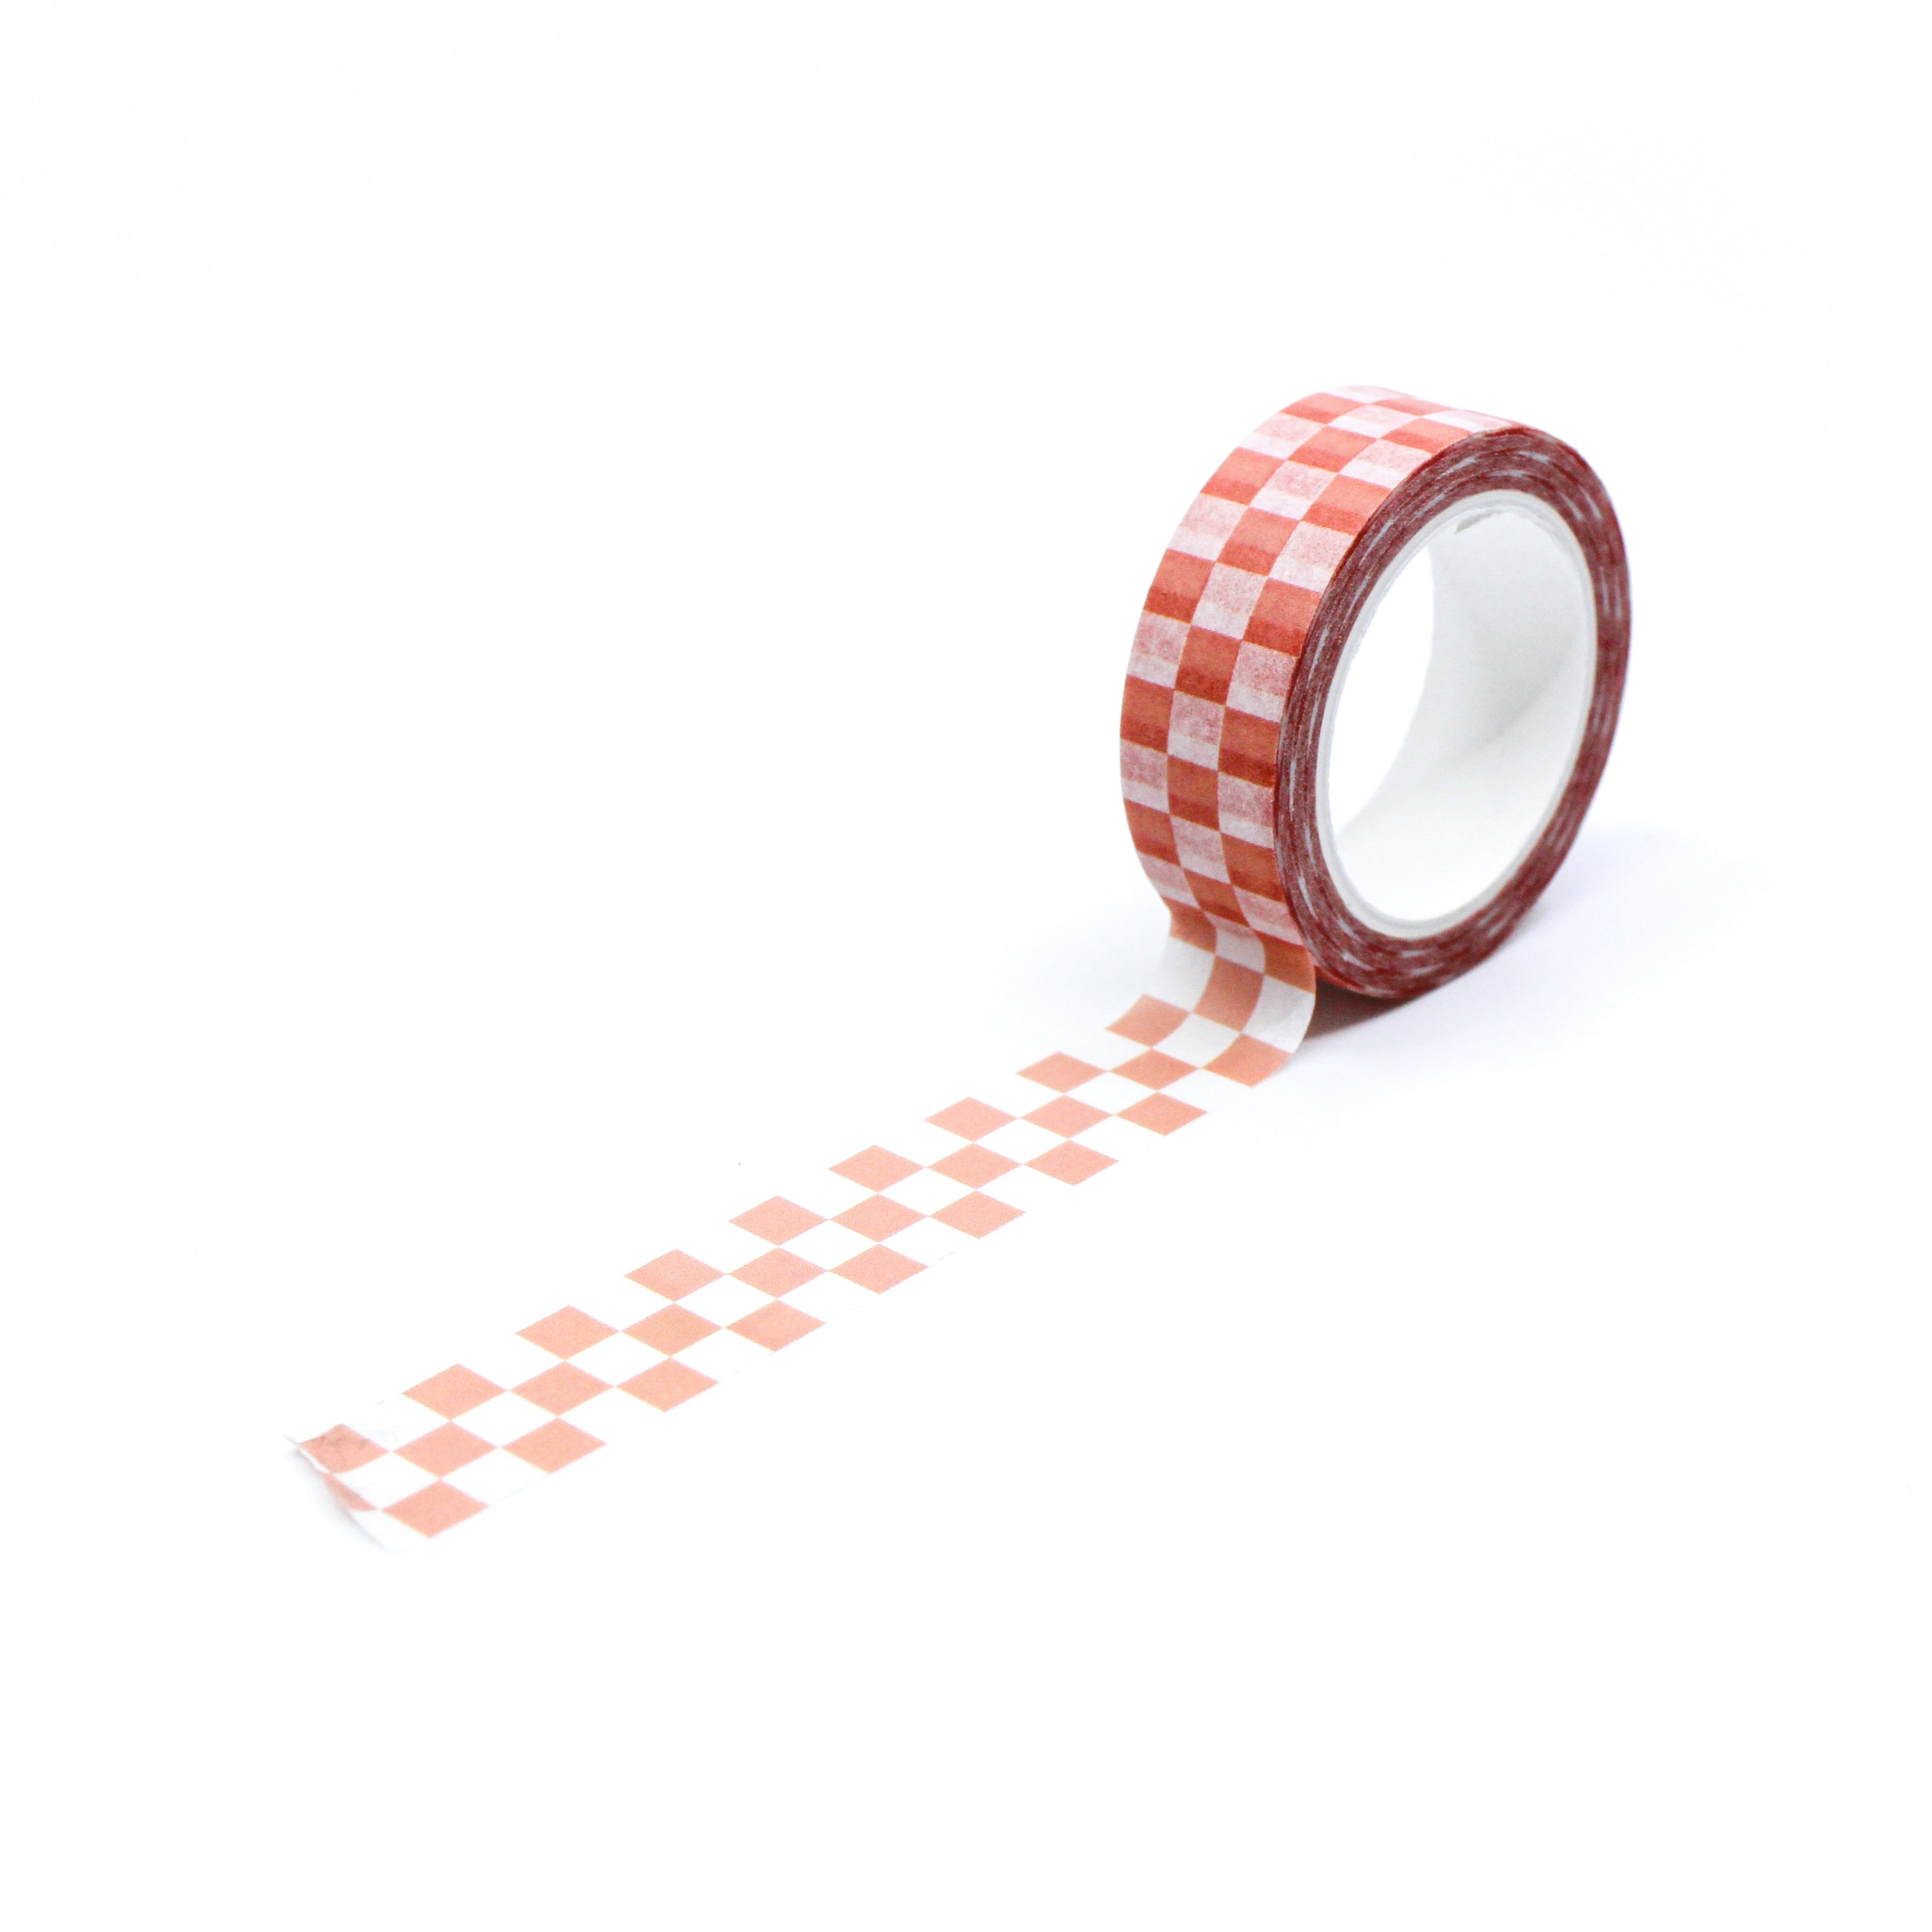 This is a full pattern repeat view of pink checkered washi tape BBB Supplies Craft Shop